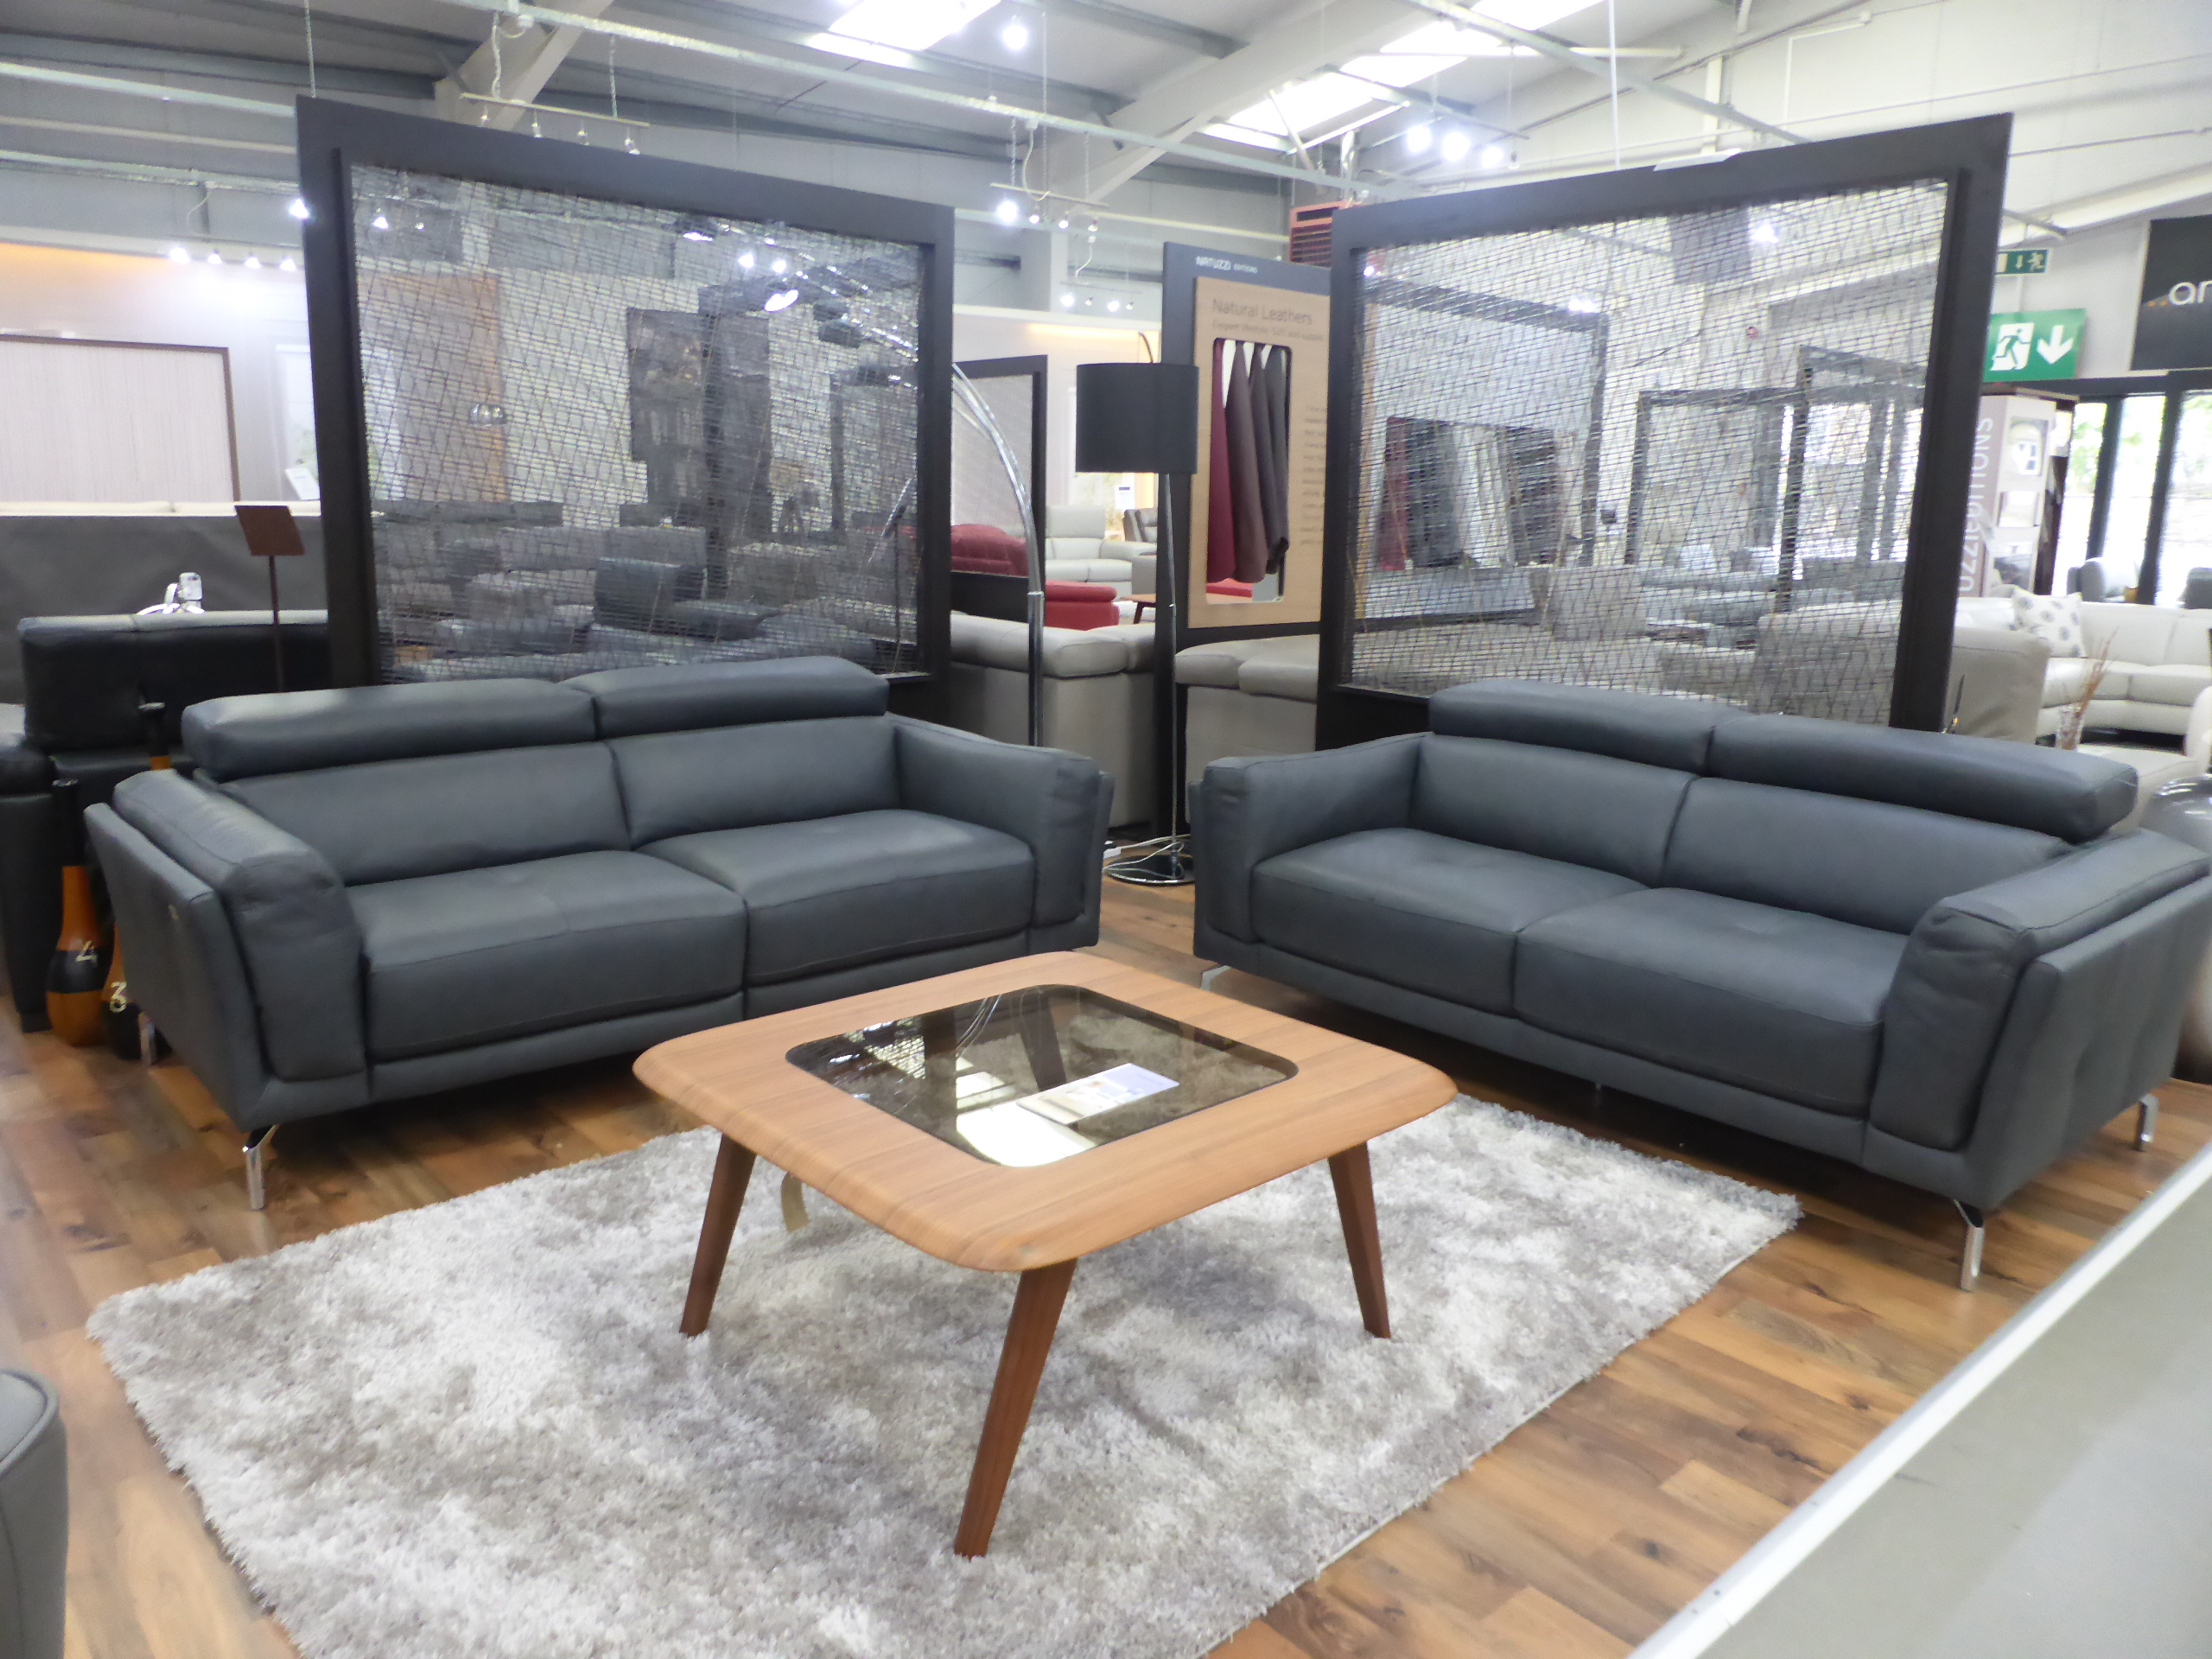 Natuzzi San Diego Italian leather power reclining 3 & static 2 seater | Sofa Max Brands Outlet